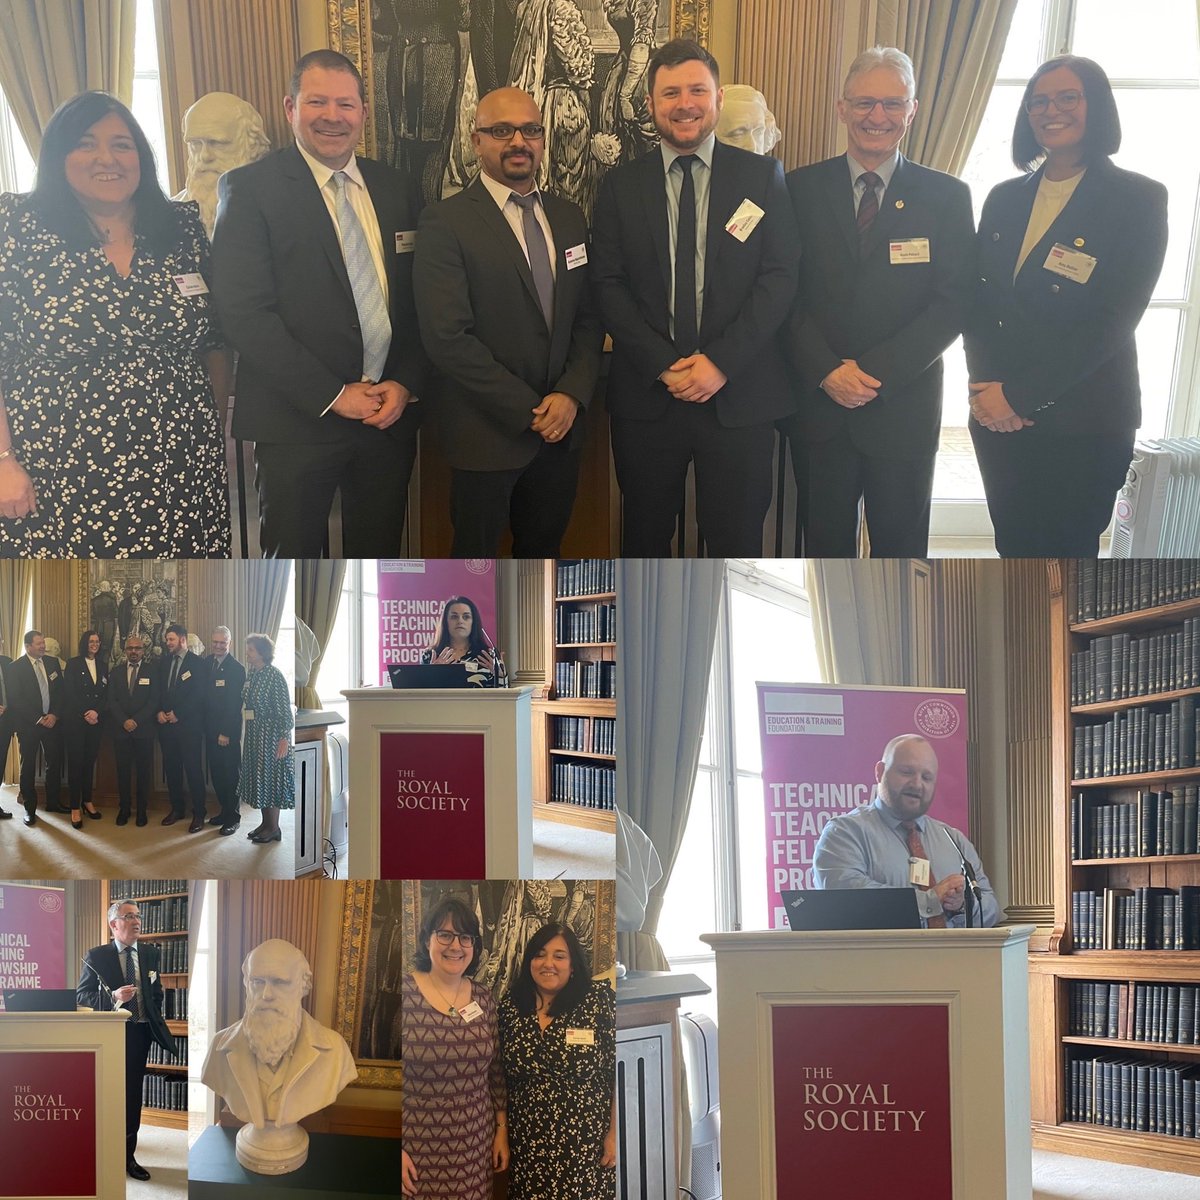 A great celebration ⁦@royalsociety⁩ as 2023 ⁦@E_T_Foundation⁩ & ⁦@Royalcom1851⁩ Technical Teaching Fellows received their awards for Technical STEM excellence,& alumni shared their sustainable impact. FE is central to realising UK STEM ambitions #ETFsupportsFE